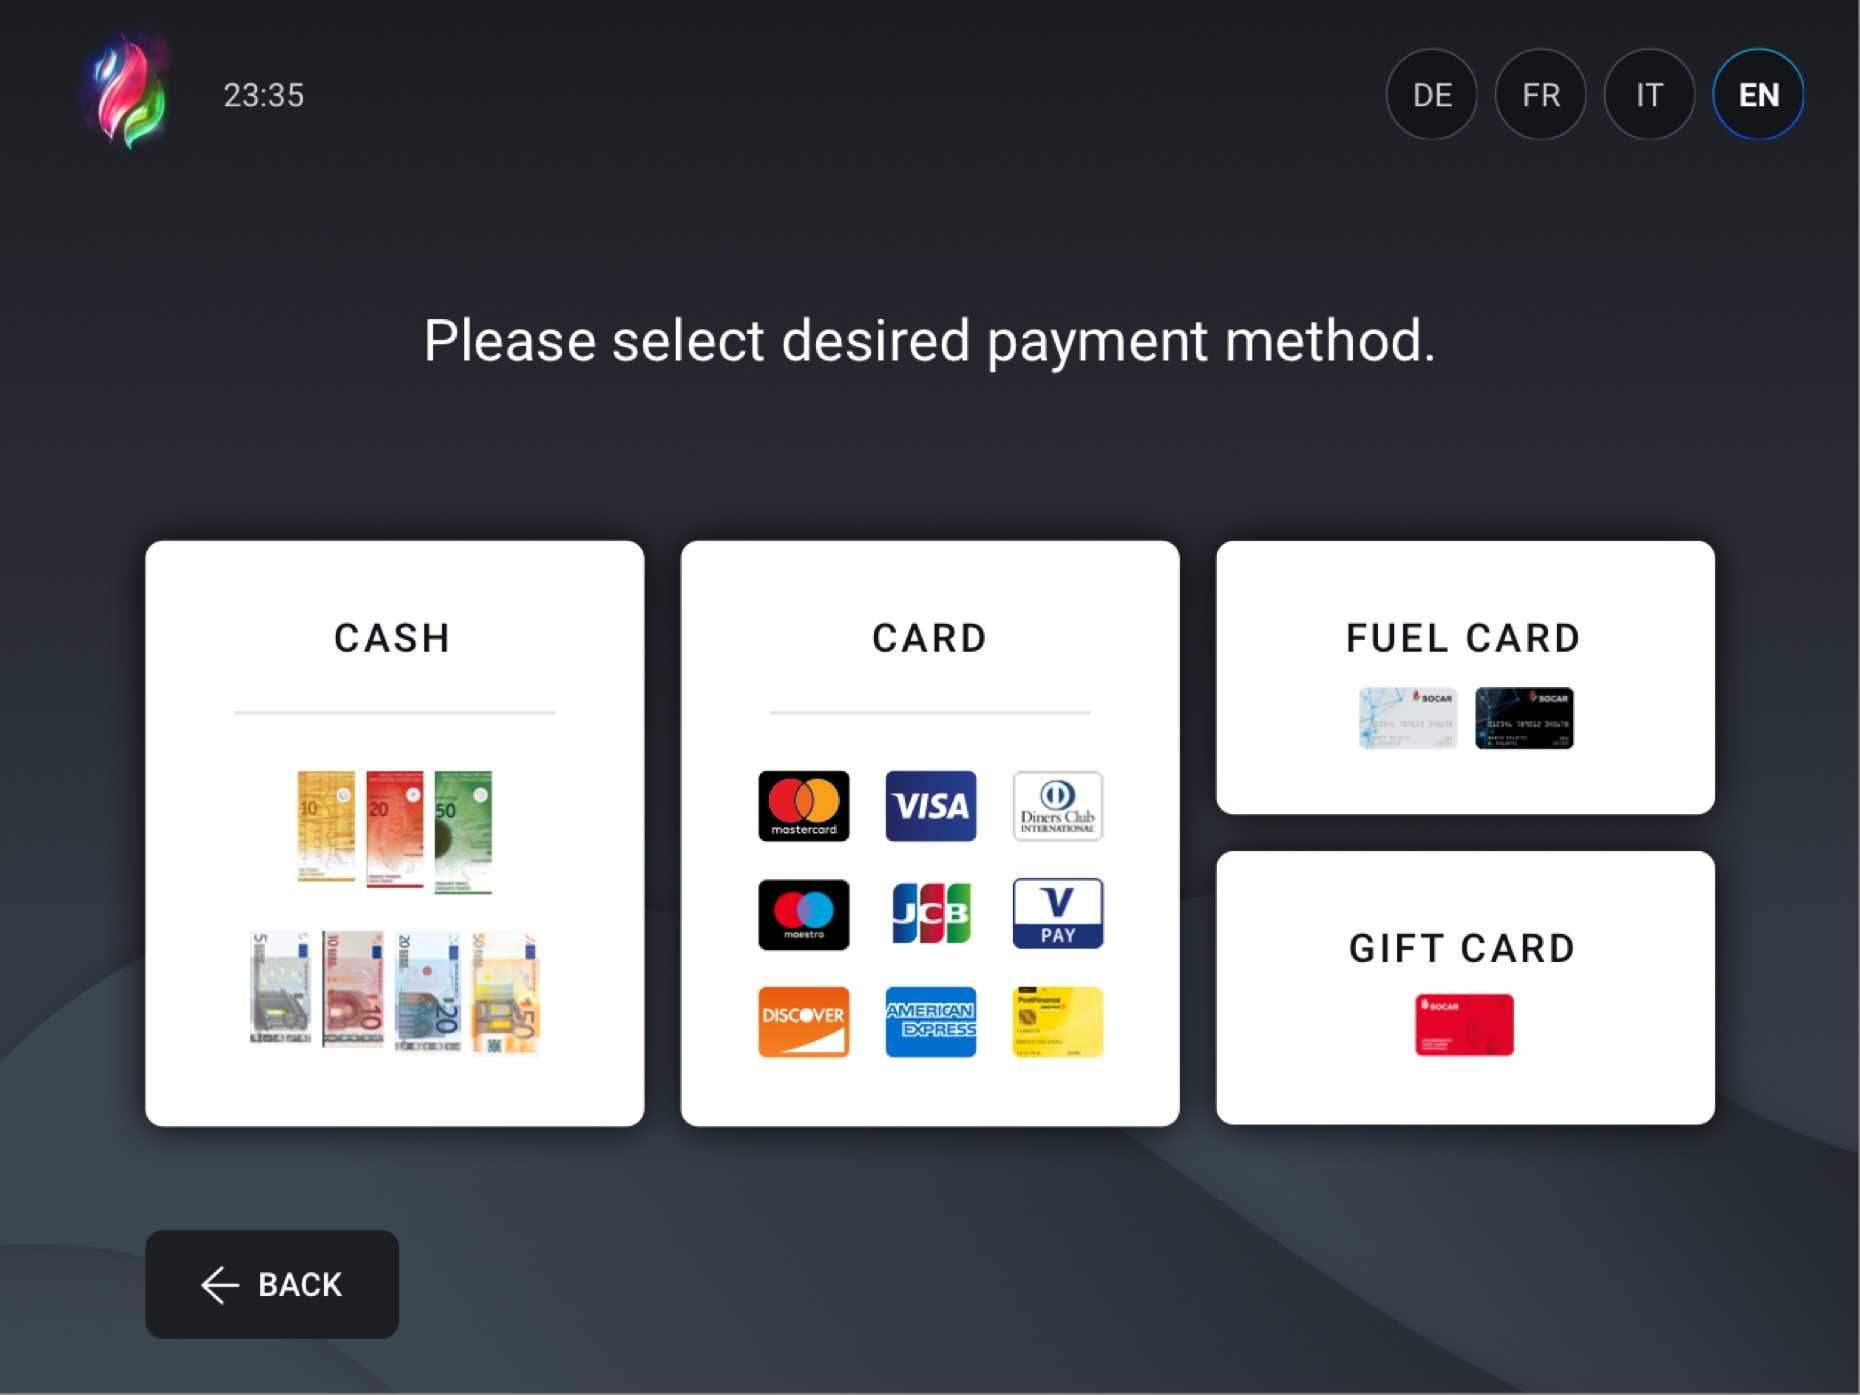 UI design for embedded system where users select the payment method in the self checkout experience